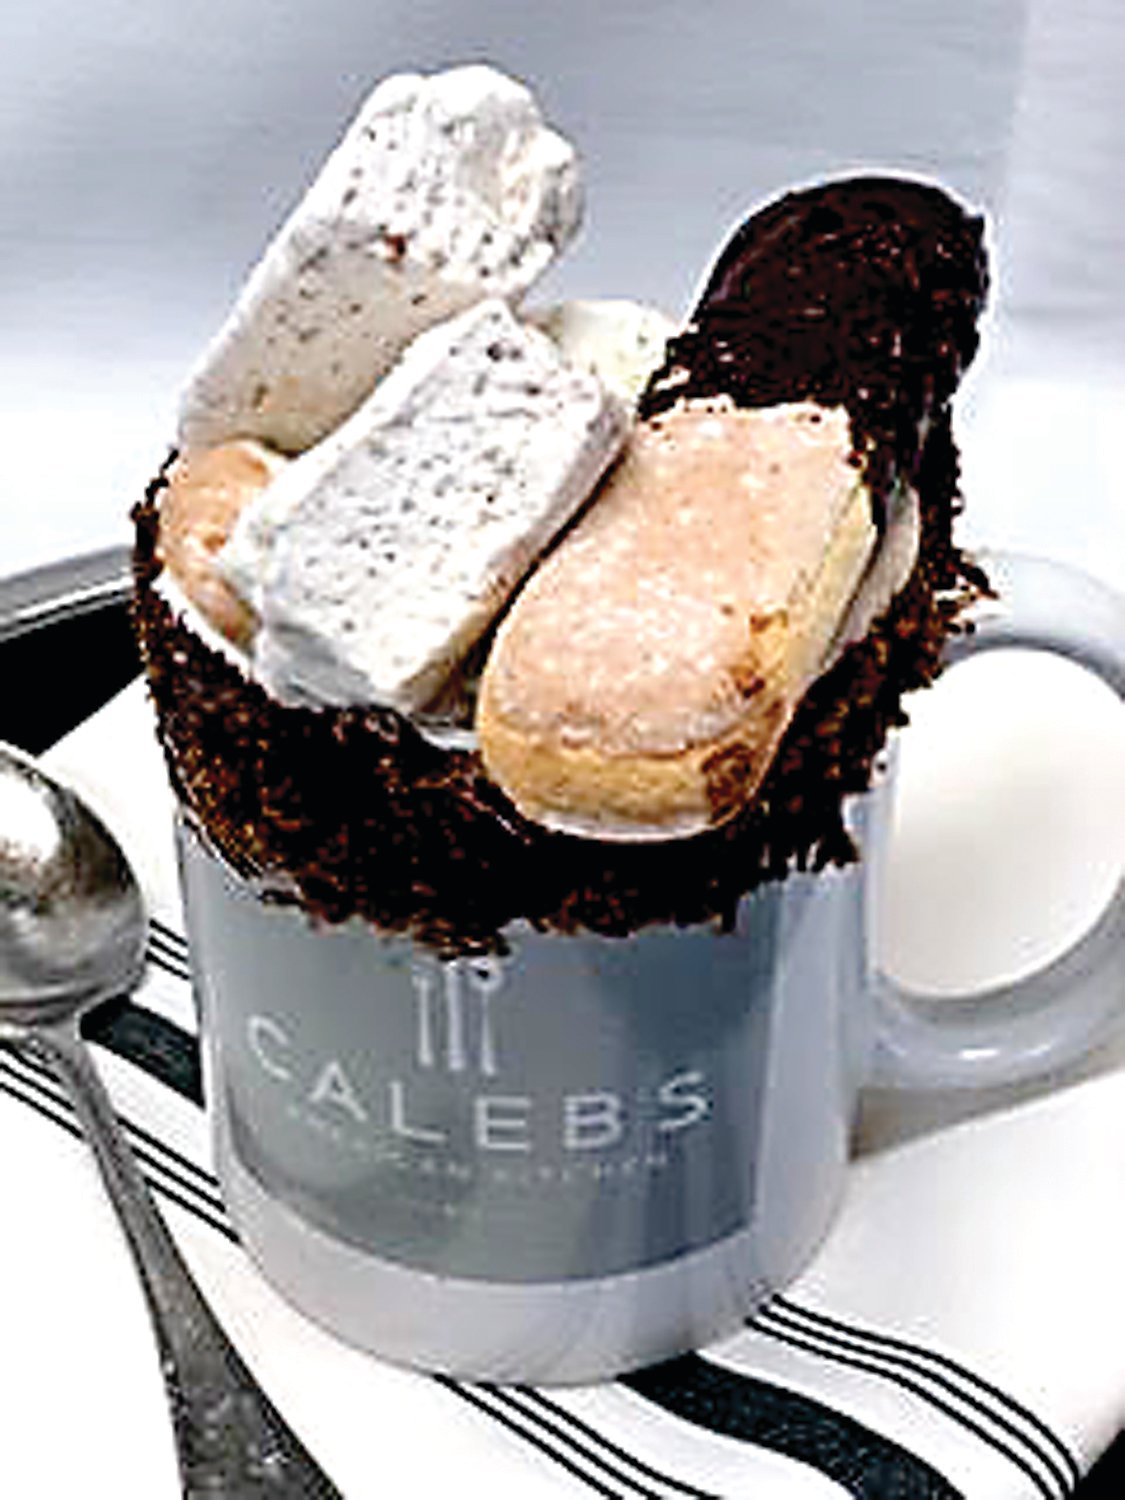 Tiramisu hot chocolate, complete with homemade marshmallows, is the hot chocolate flavor of the month at Caleb’s American Kitchen in Lahaska. Photograph by Caleb’s American Kitchen.